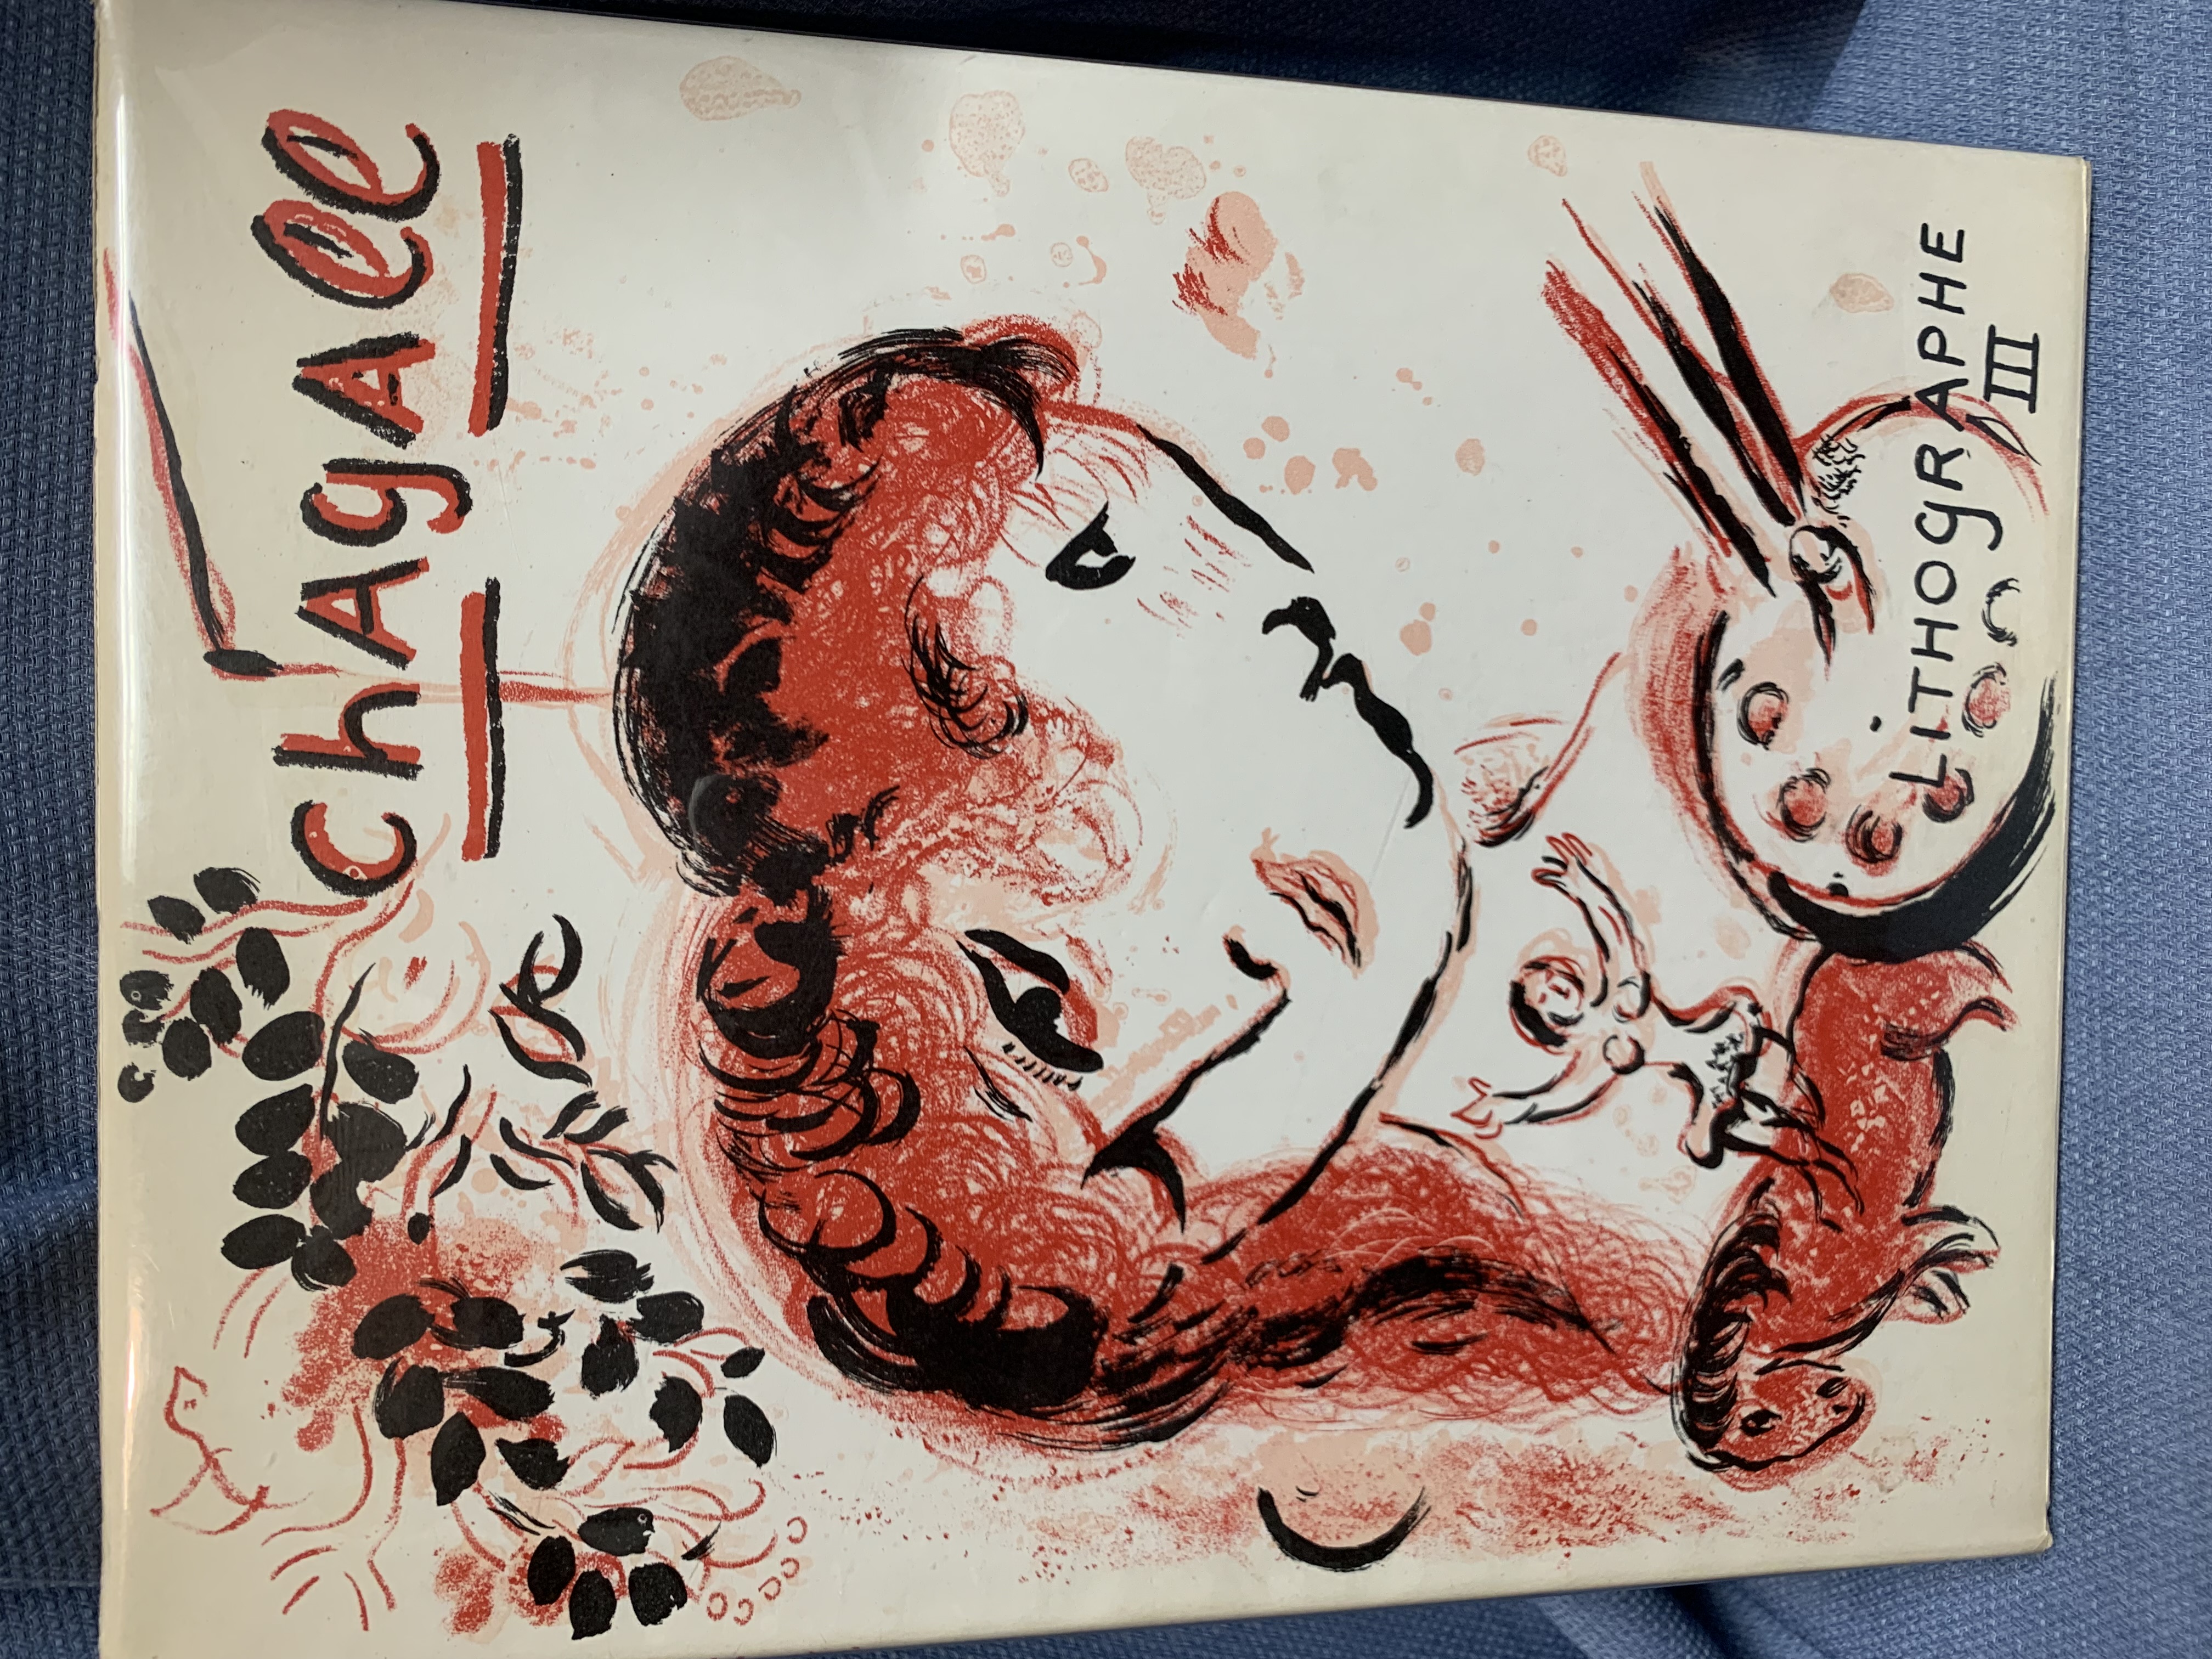 The Lithographs of Chagall 1962 - 1968